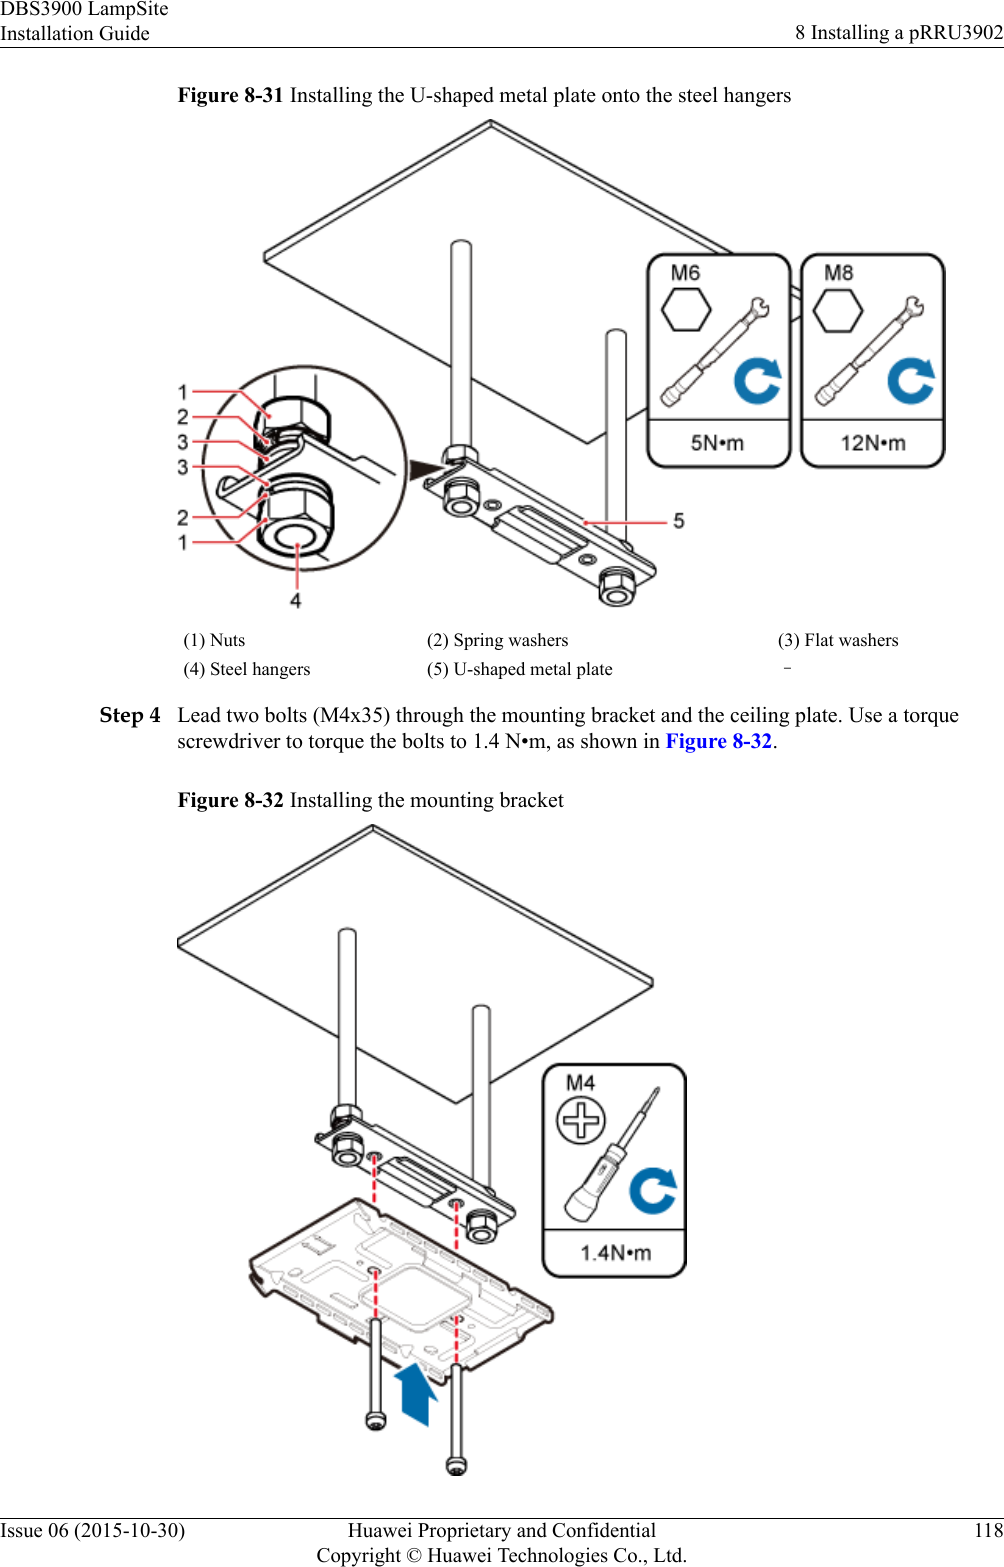 Figure 8-31 Installing the U-shaped metal plate onto the steel hangers(1) Nuts (2) Spring washers (3) Flat washers(4) Steel hangers (5) U-shaped metal plate –Step 4 Lead two bolts (M4x35) through the mounting bracket and the ceiling plate. Use a torquescrewdriver to torque the bolts to 1.4 N•m, as shown in Figure 8-32.Figure 8-32 Installing the mounting bracketDBS3900 LampSiteInstallation Guide 8 Installing a pRRU3902Issue 06 (2015-10-30) Huawei Proprietary and ConfidentialCopyright © Huawei Technologies Co., Ltd.118